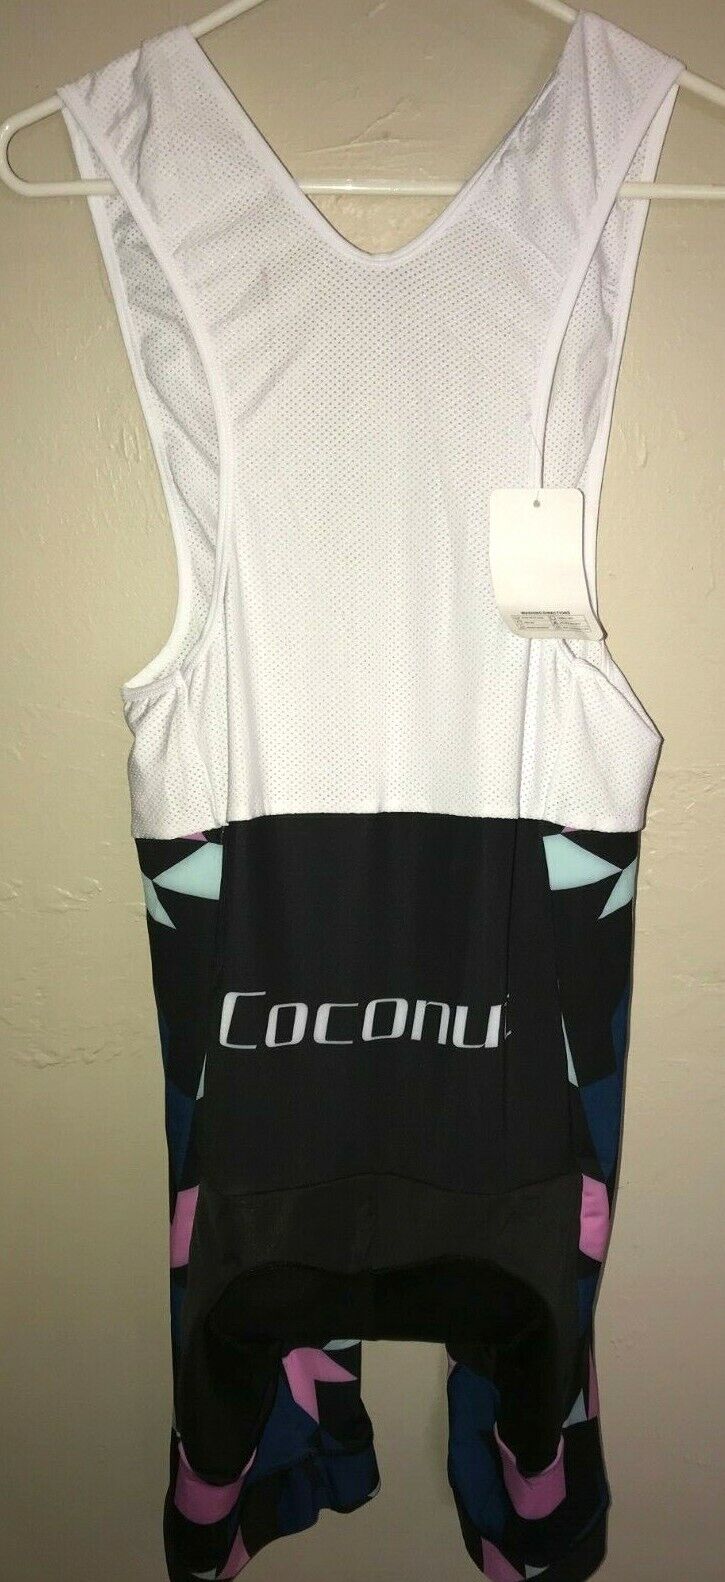 womens size XL NEW NWT BICYCLE 1 PC SPORTS WEAR PADDED SEAT INSIDE NICE @@ COCONUT